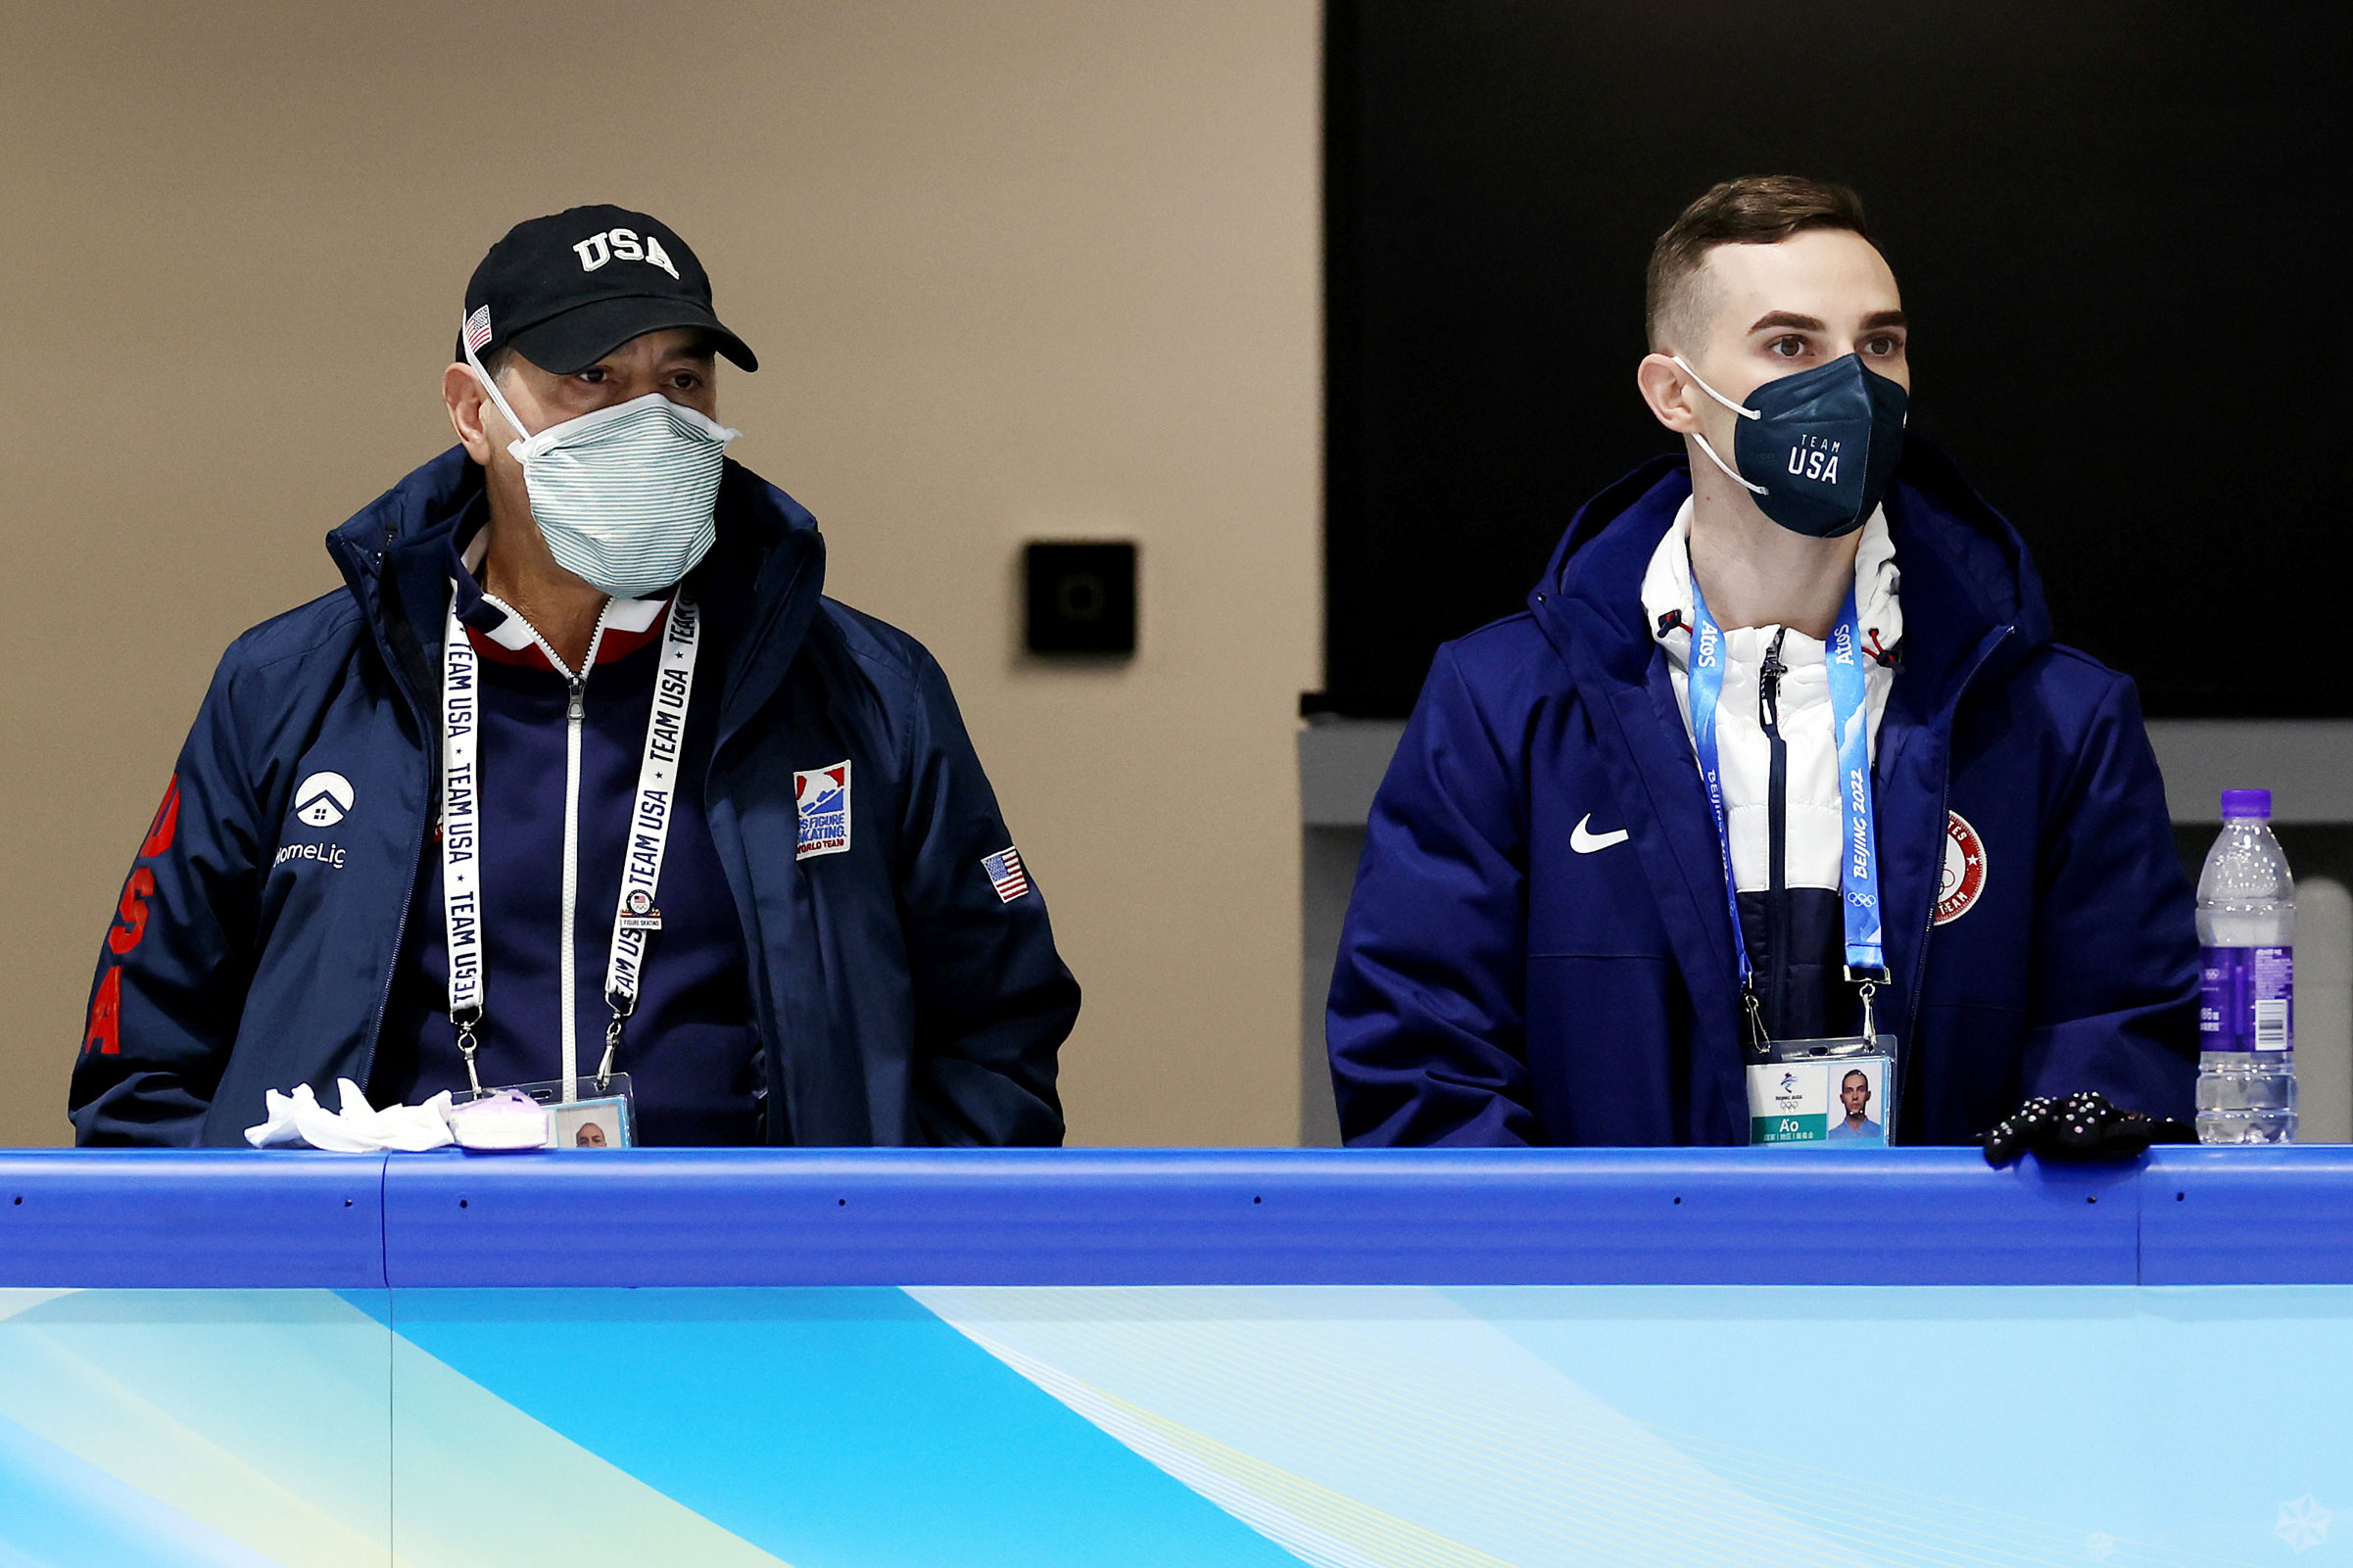 Coaches Rafael Arutyunyan (L) and Adam Rippon (R) look on during a practice session ahead of the Beijing 2022 Winter Olympic Games on Feb. 1.